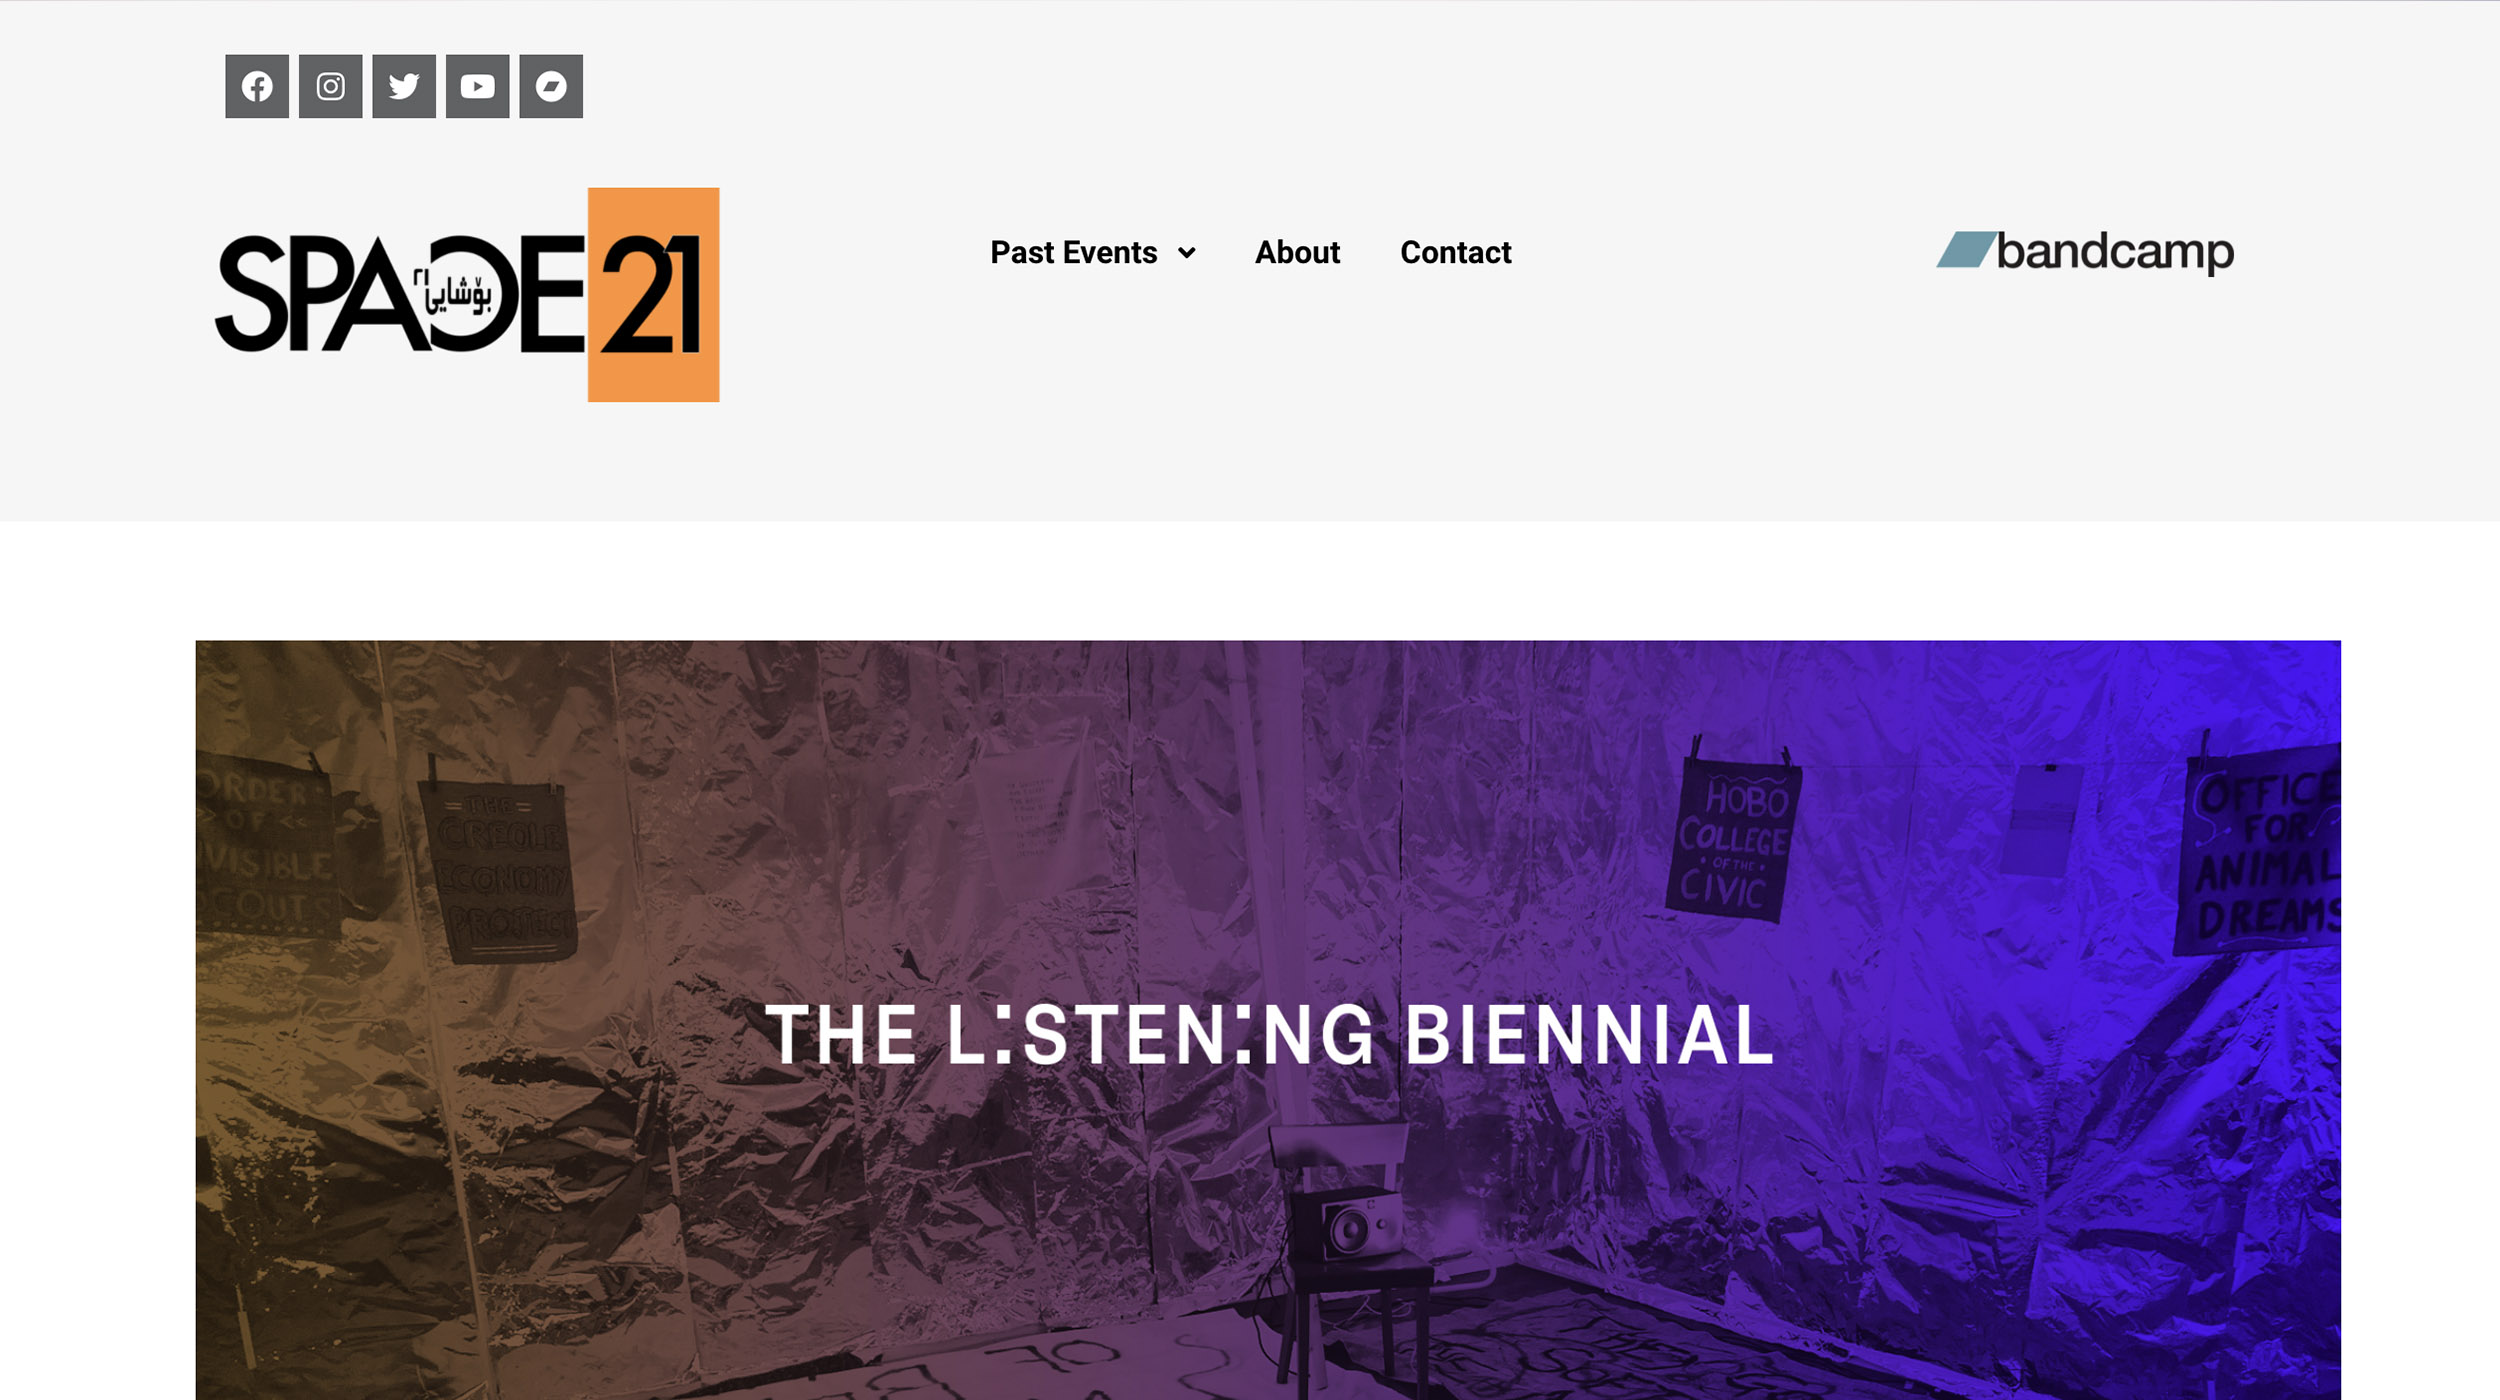 Sapce 21 website home page - menus and purple image of a room with title 'The Listening Biennial'